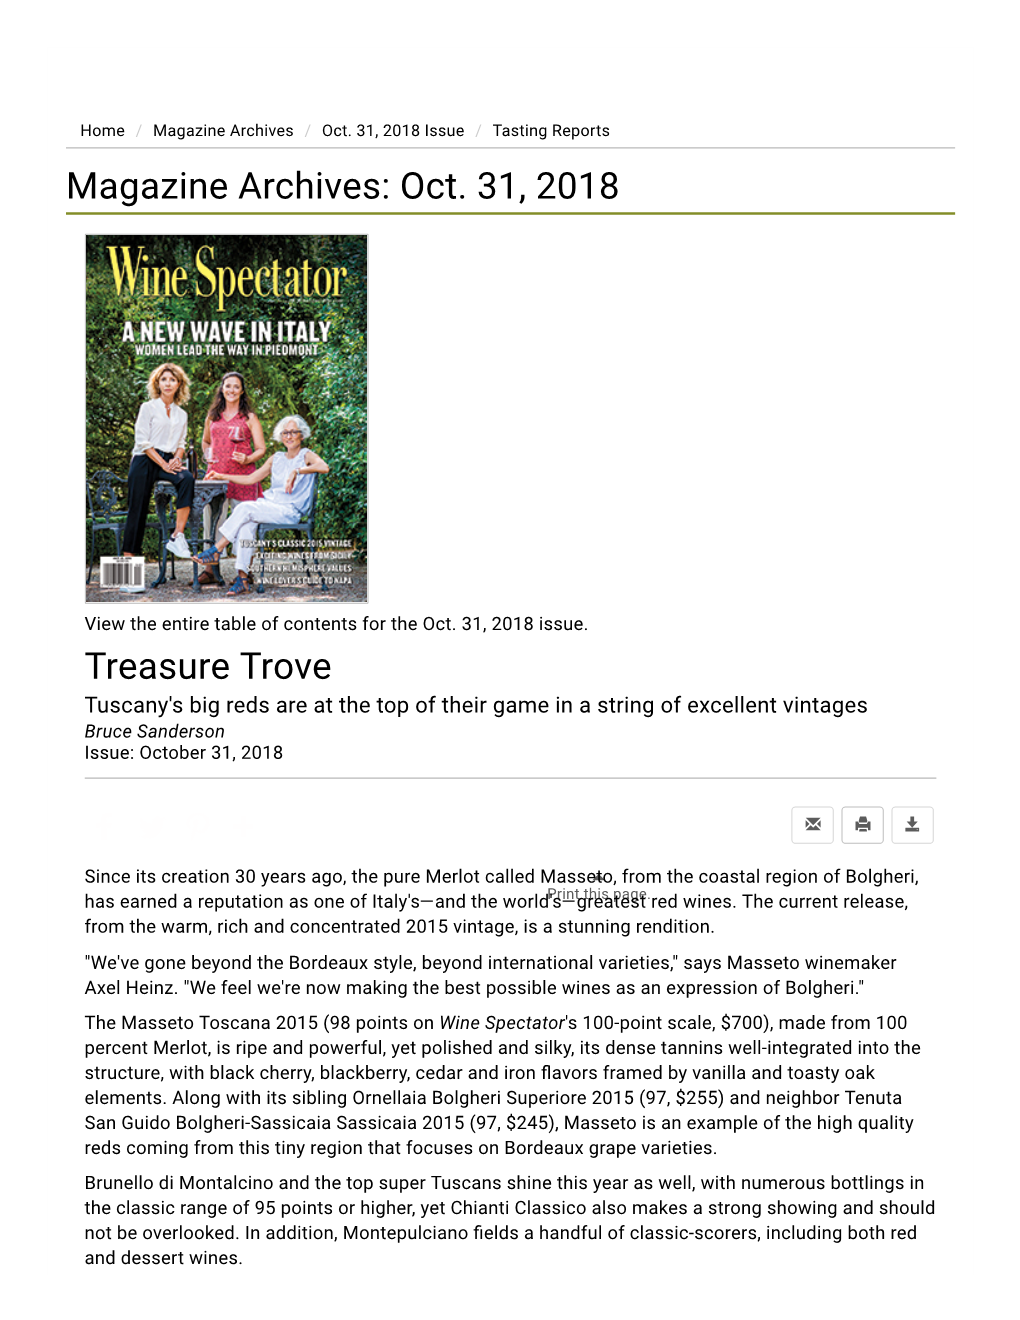 Treasure Trove | Tasting Reports | News & Features